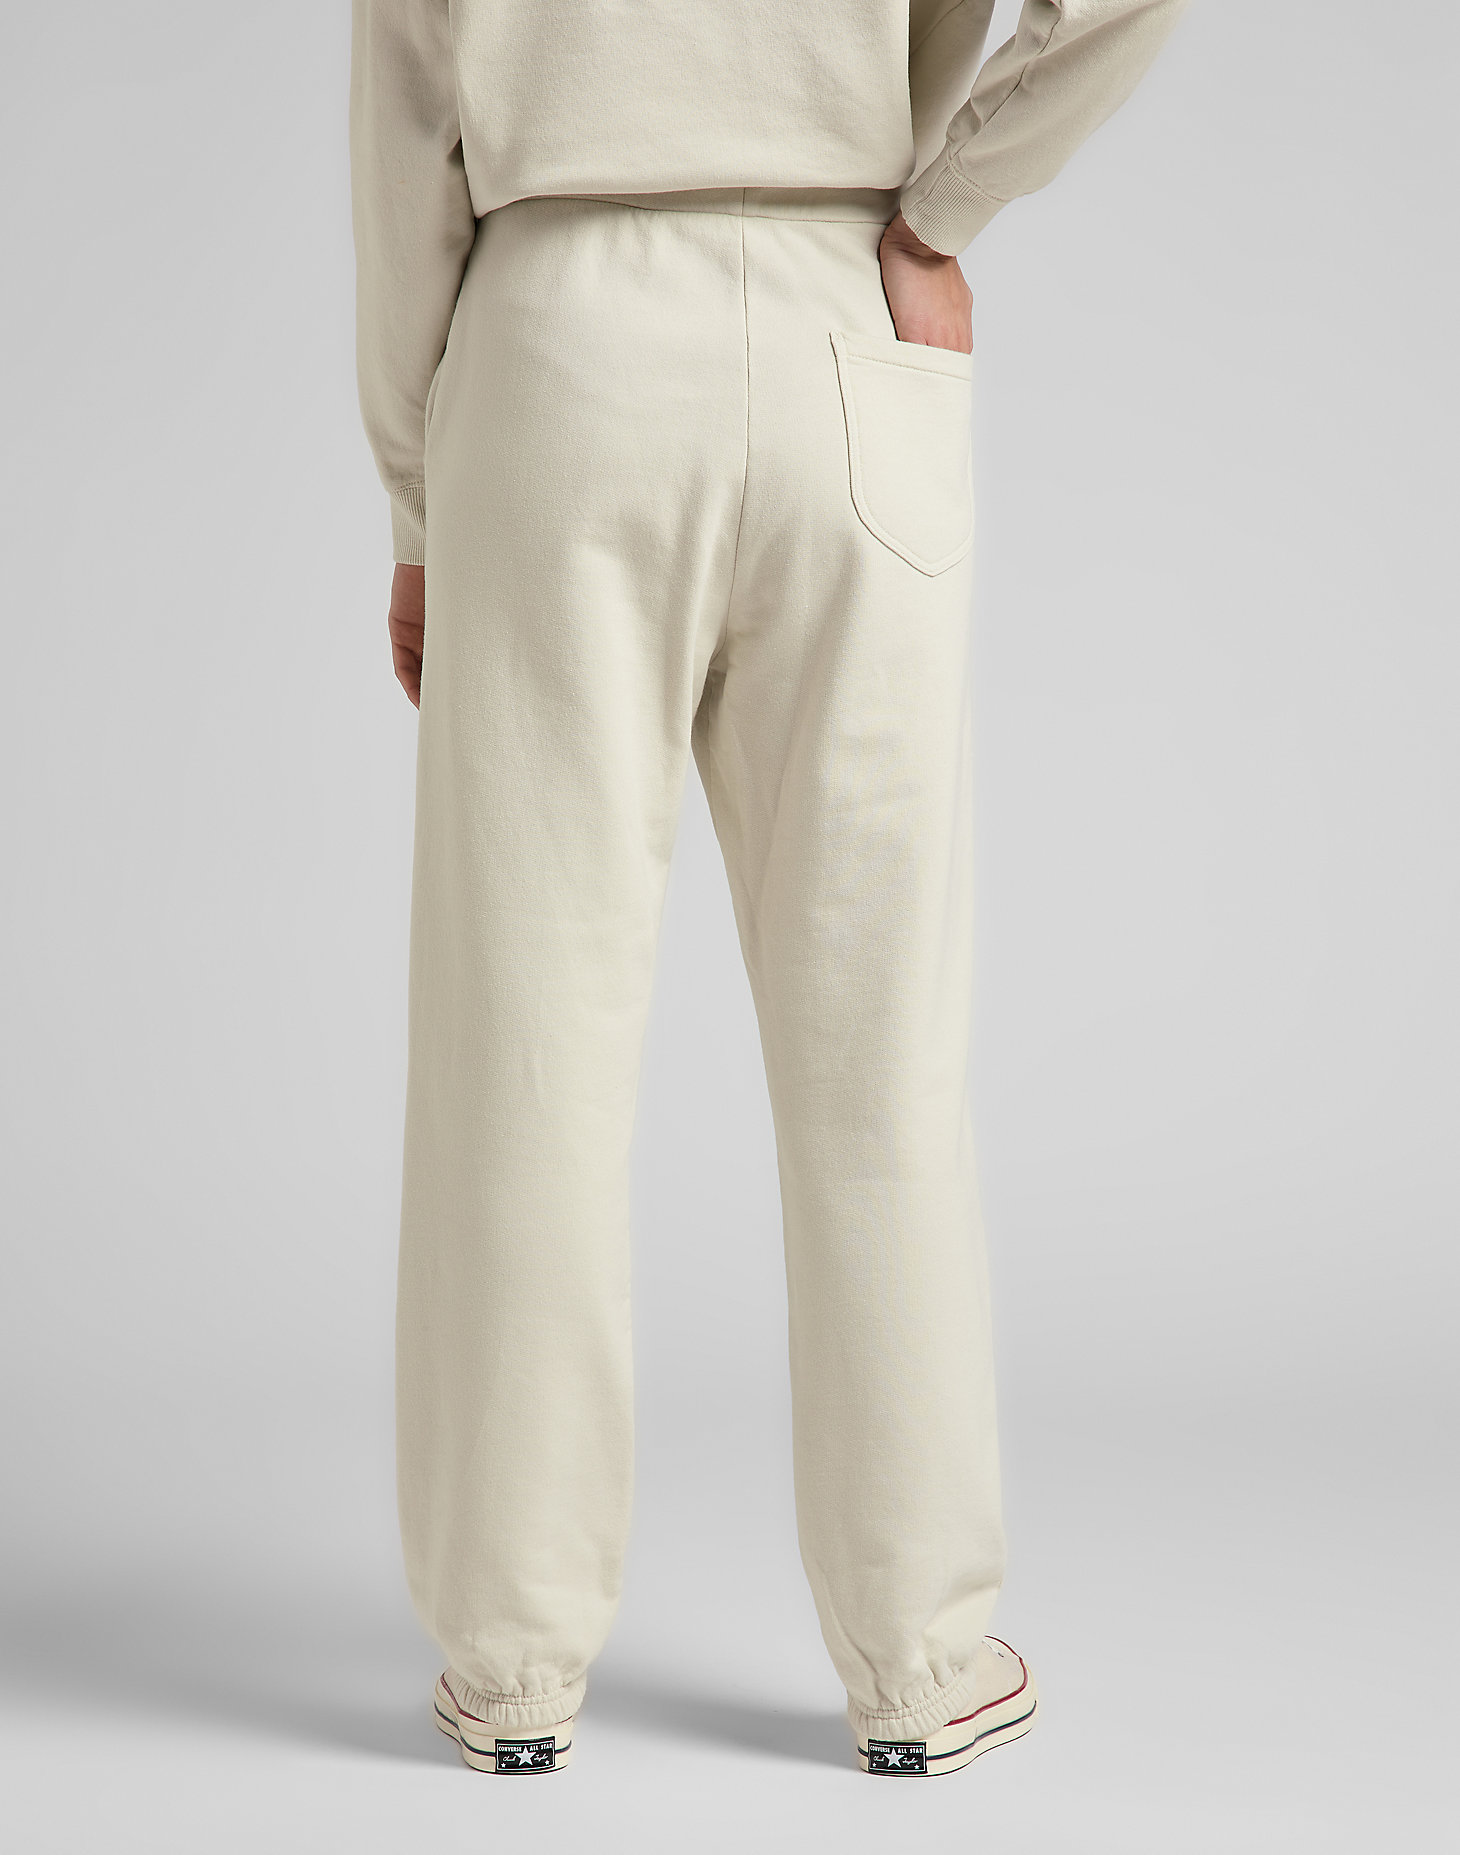 Relaxed Sweatpants in Workwear White alternative view 1